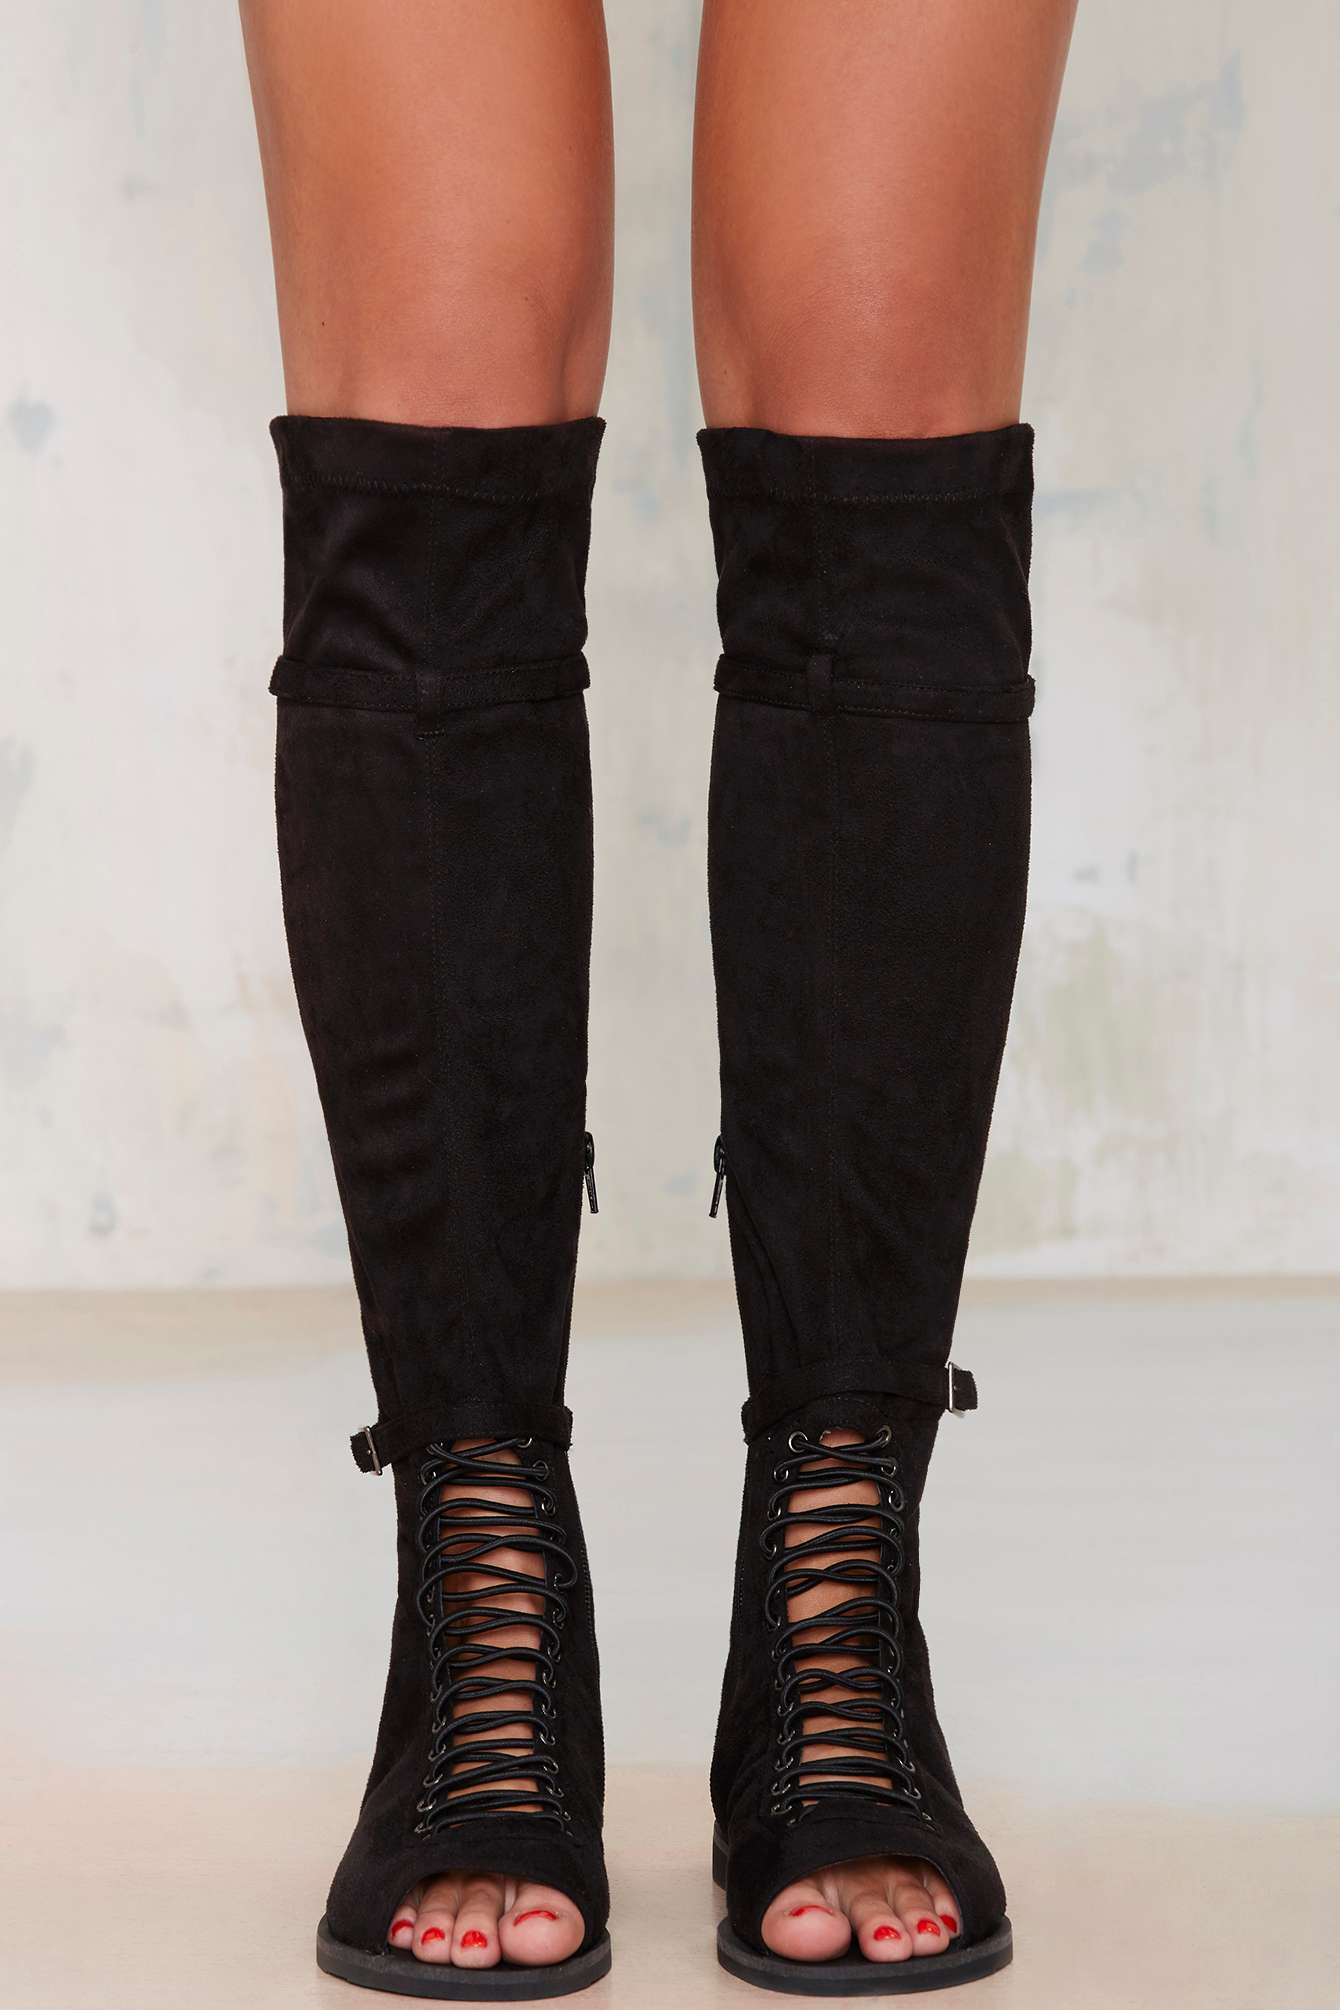 Lyst - Nasty Gal Reward Lace-up Suede Boot in Black